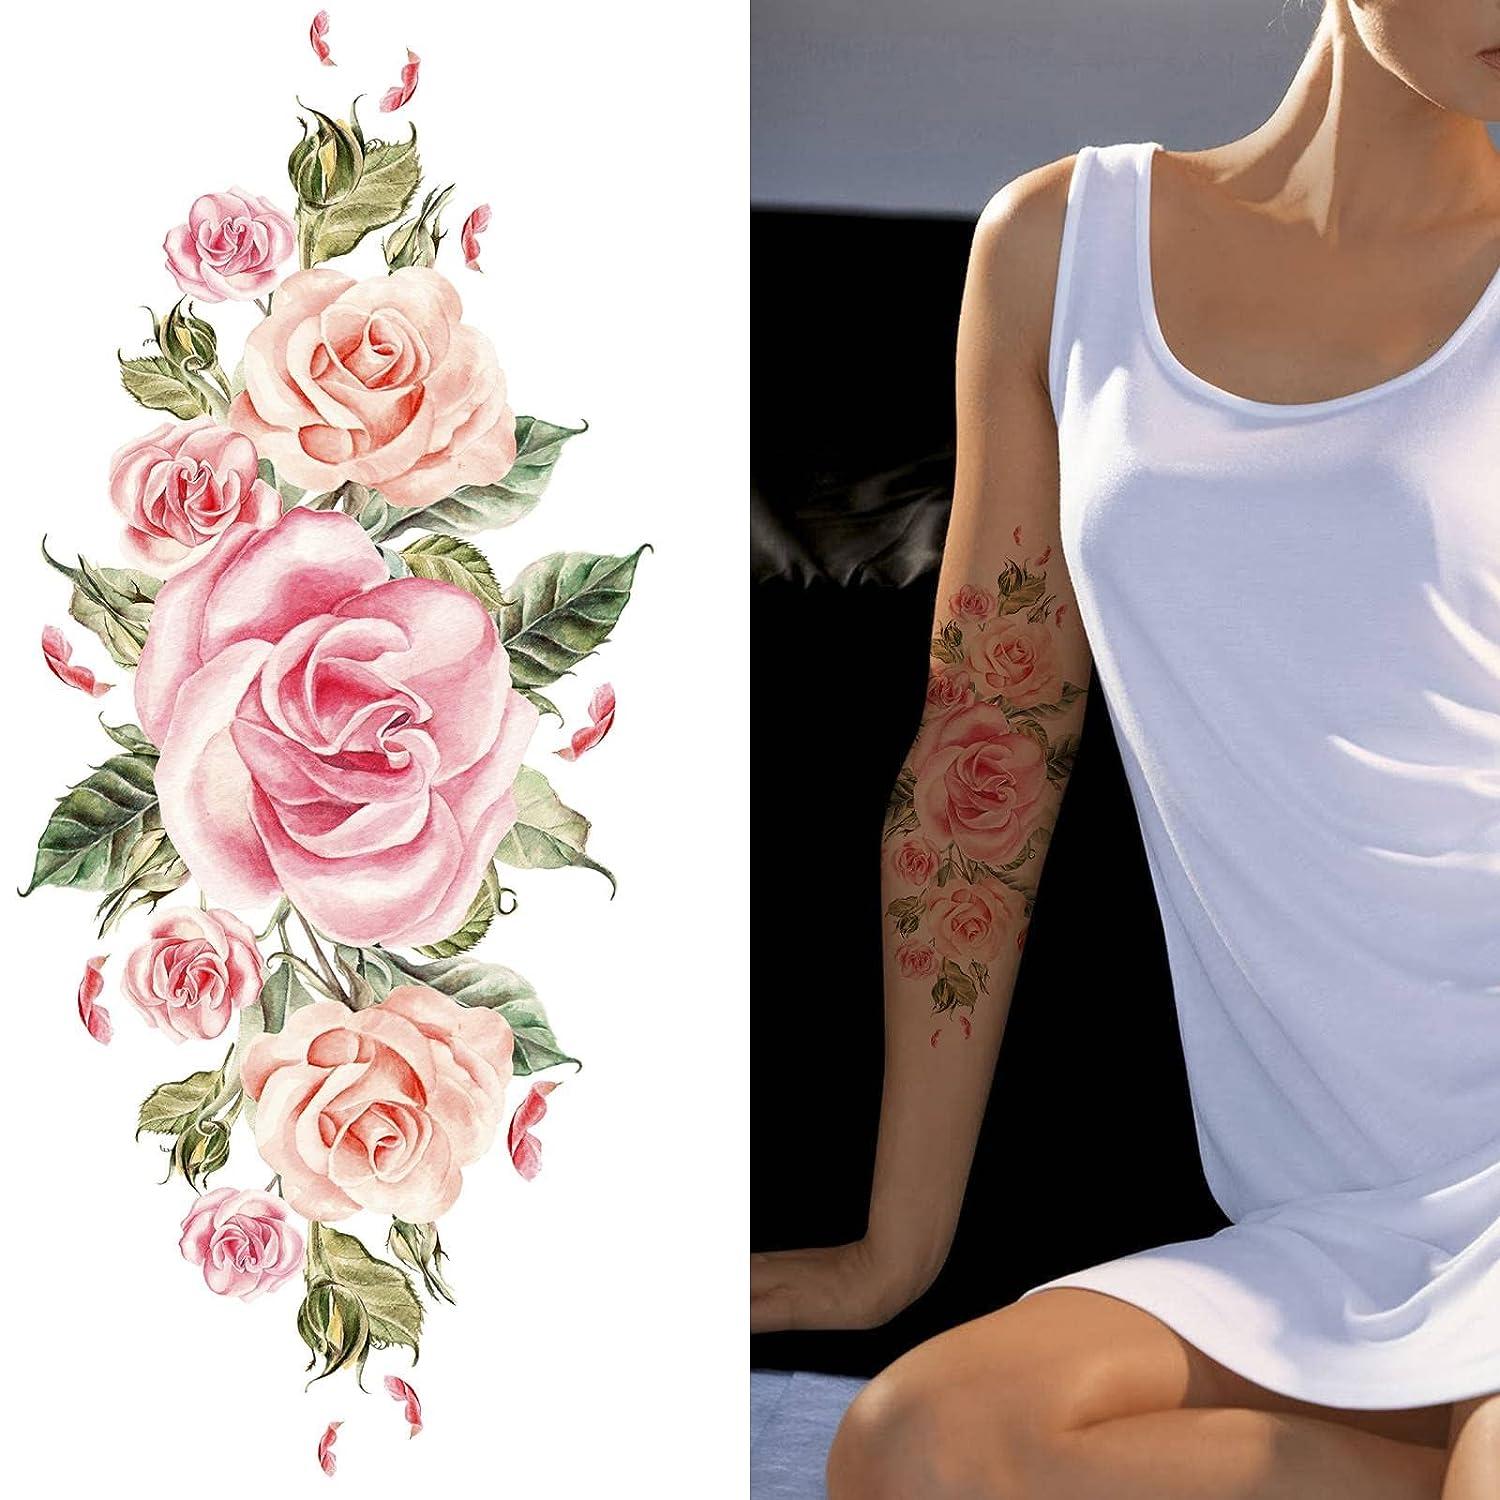 Quichic 60 Designs Flower Tattoos Temporary Realistic Large Flower Tattoos For Women Sexy